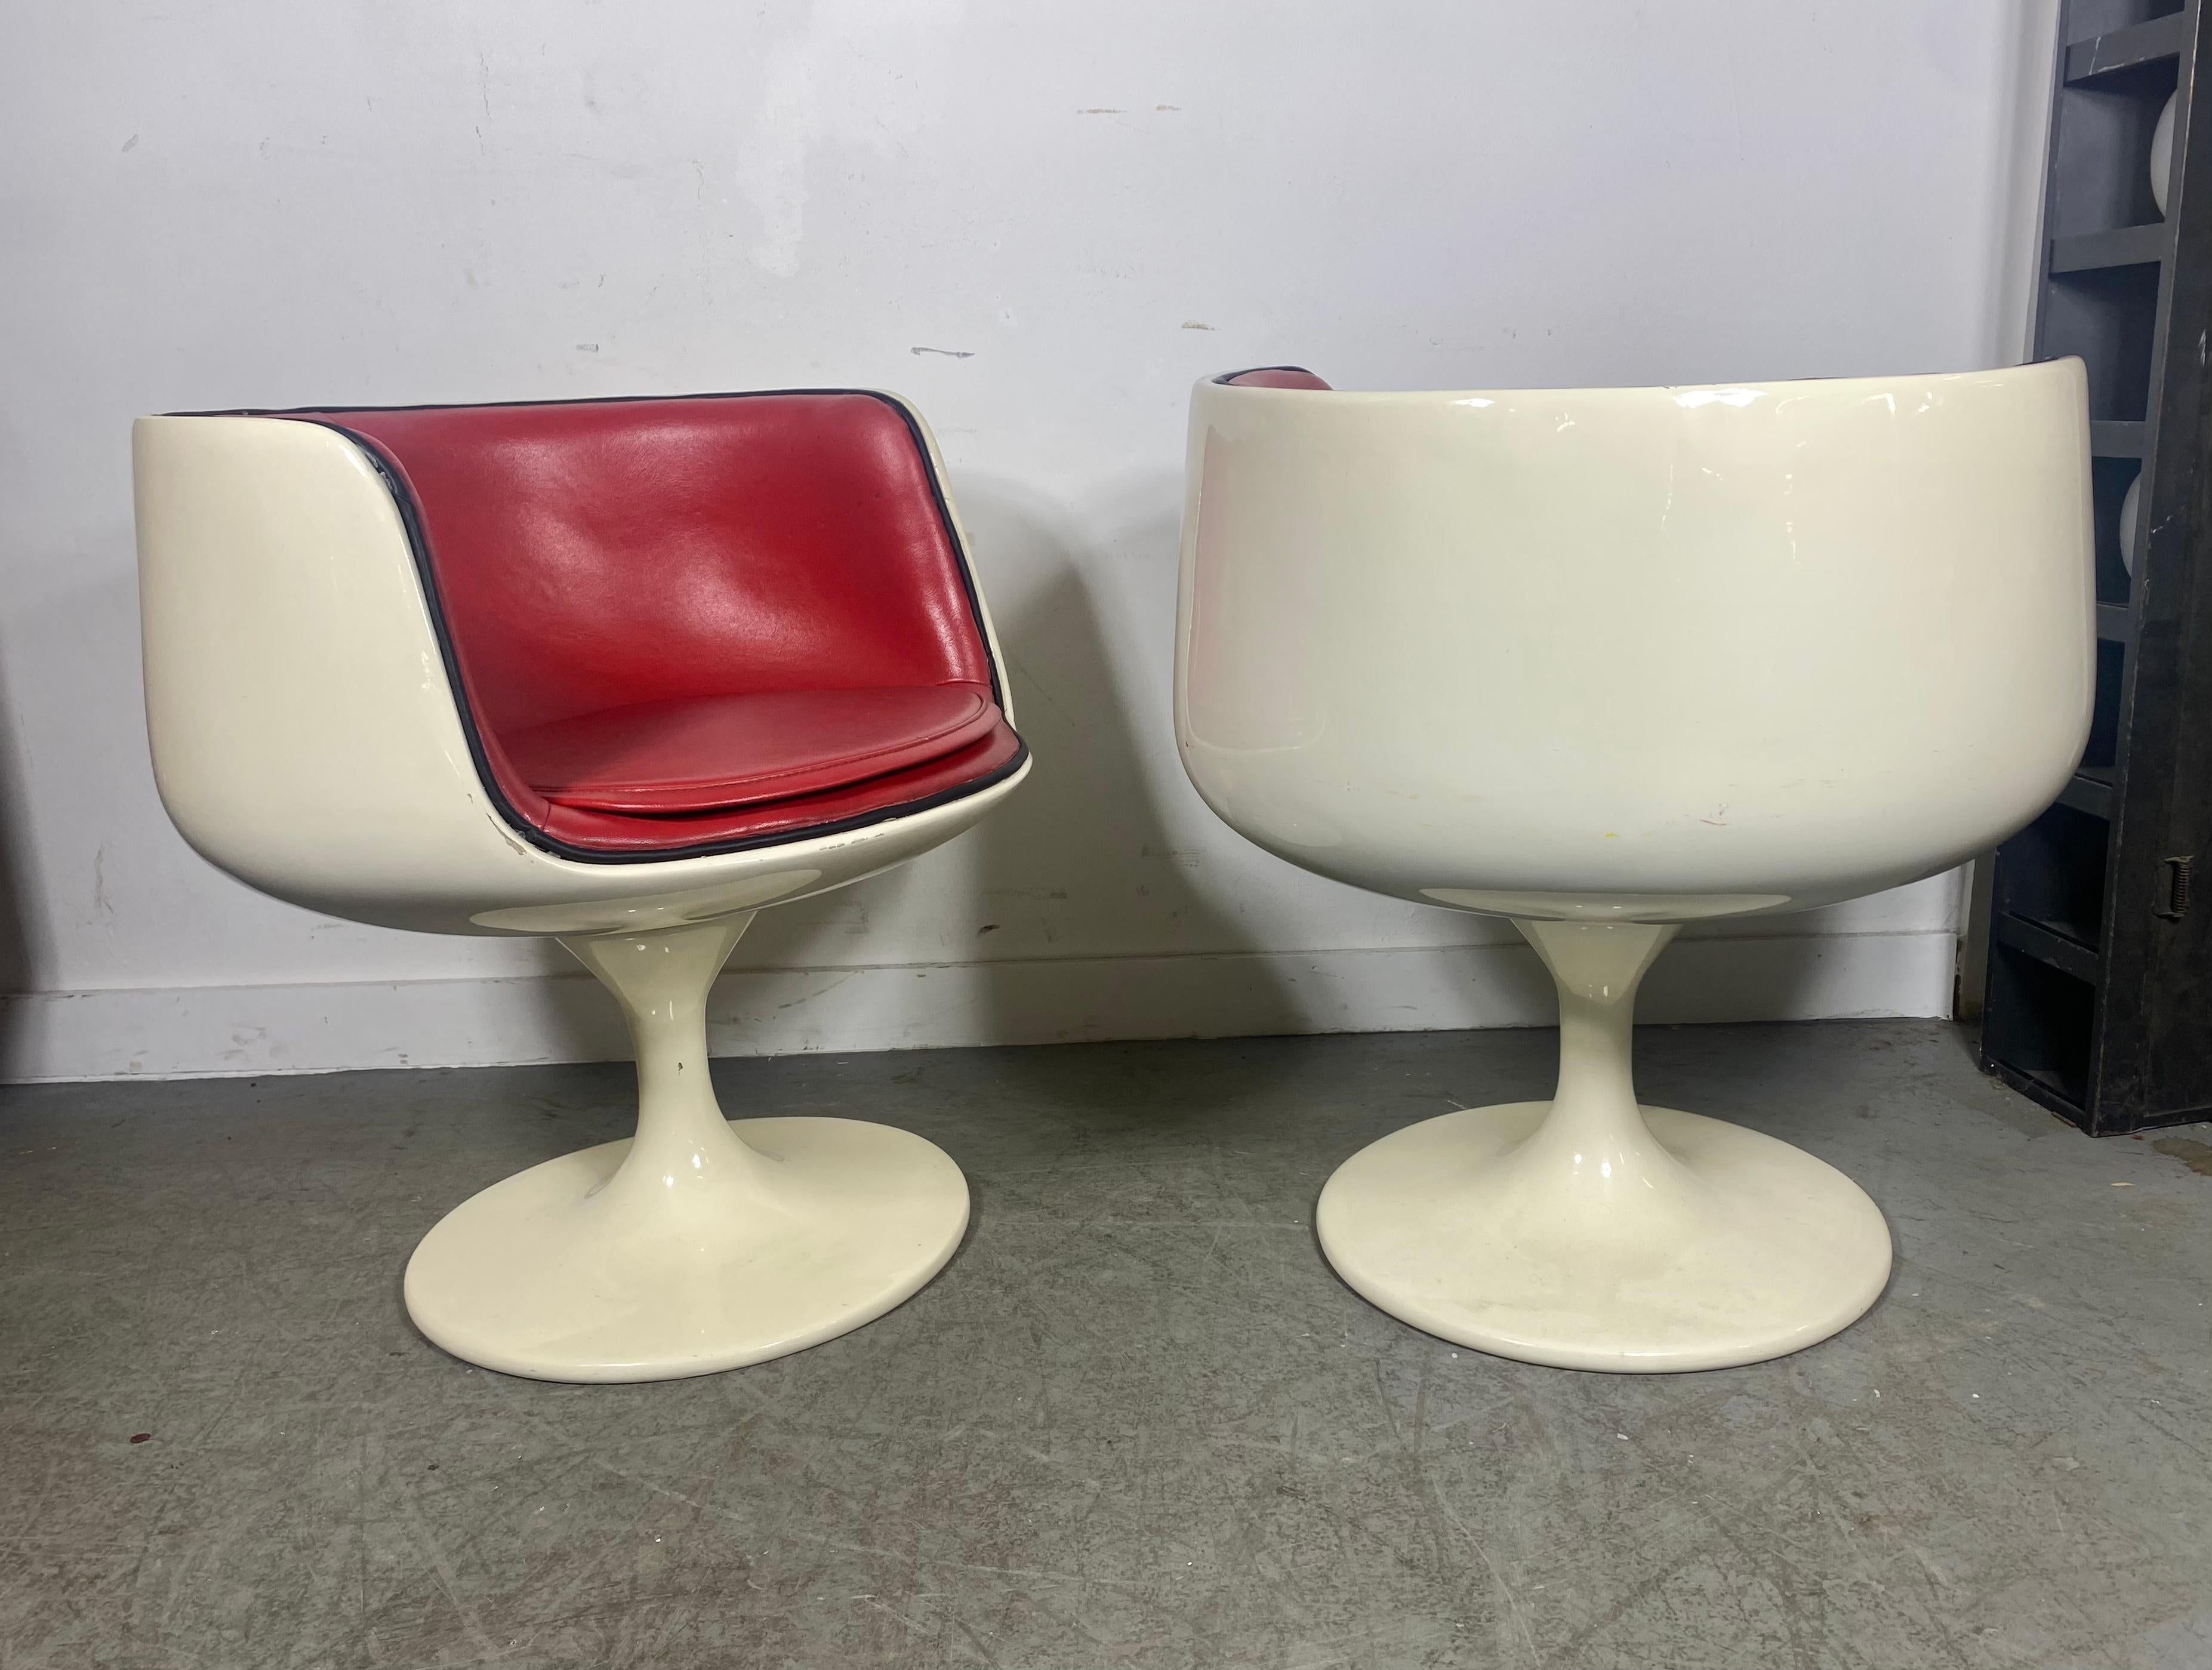  Eero Aarnio, Asko Cognac V.S.O.P Chairs... Classic Pop MOdernist  For Sale 1